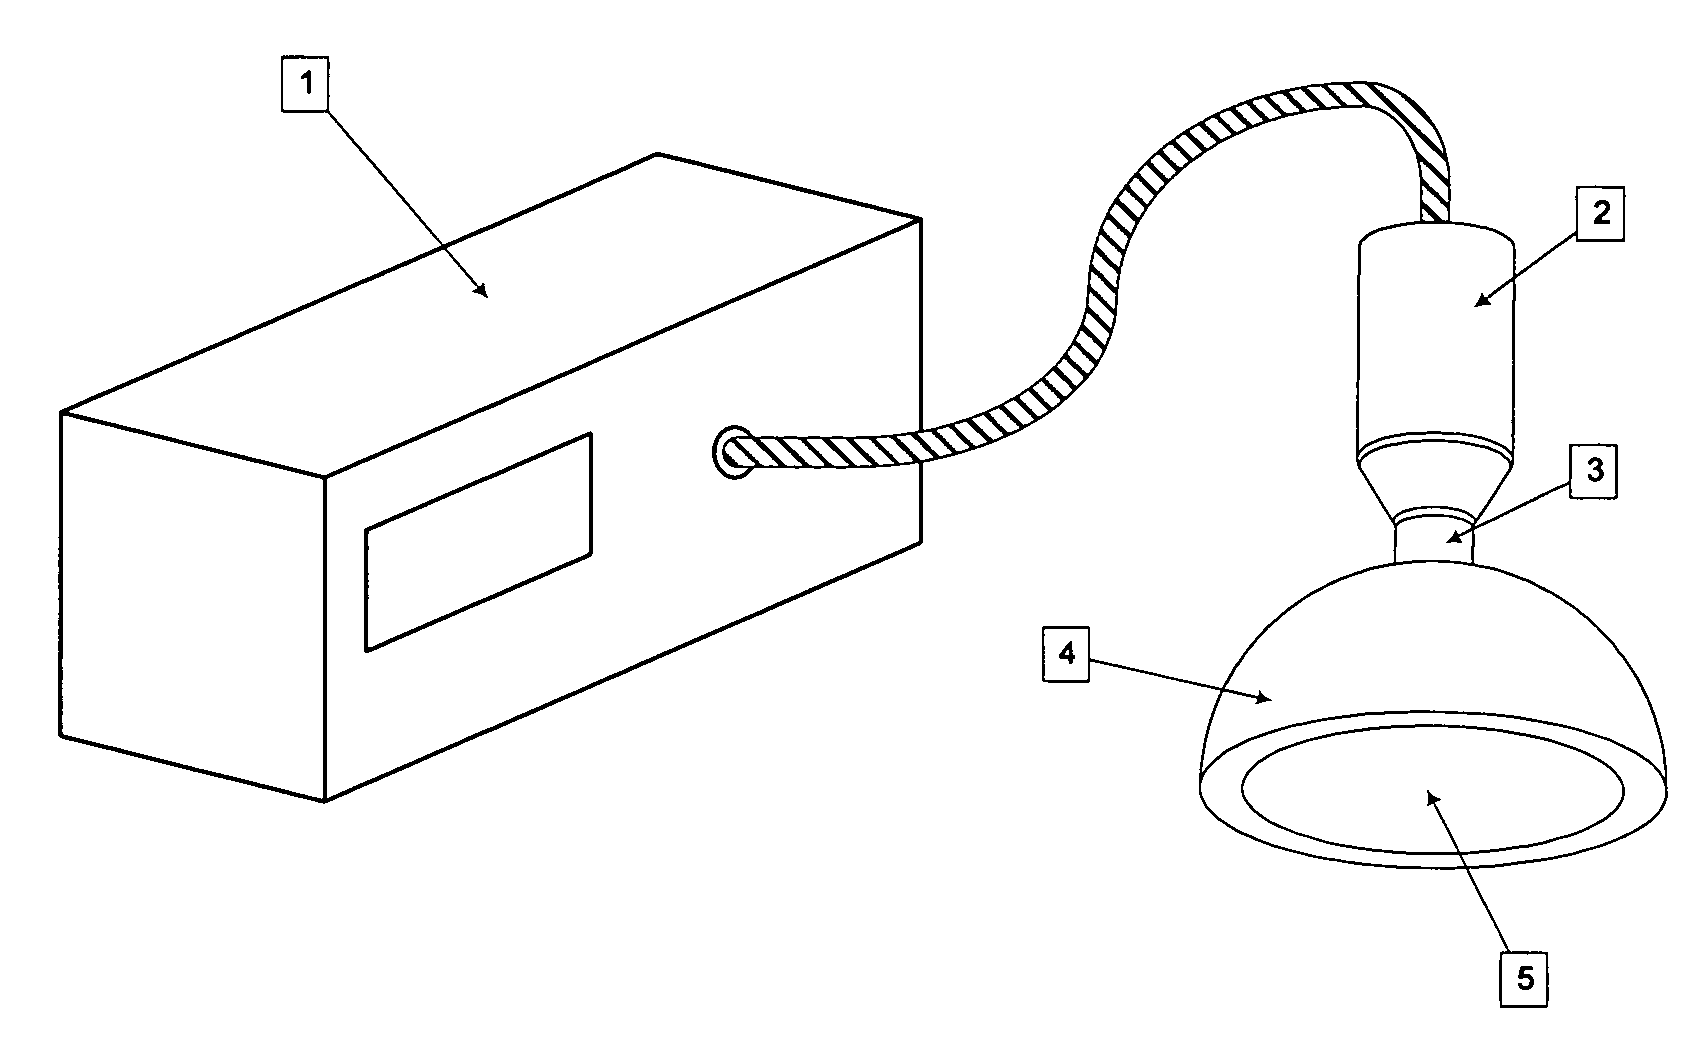 Ultrasound wound care device and method